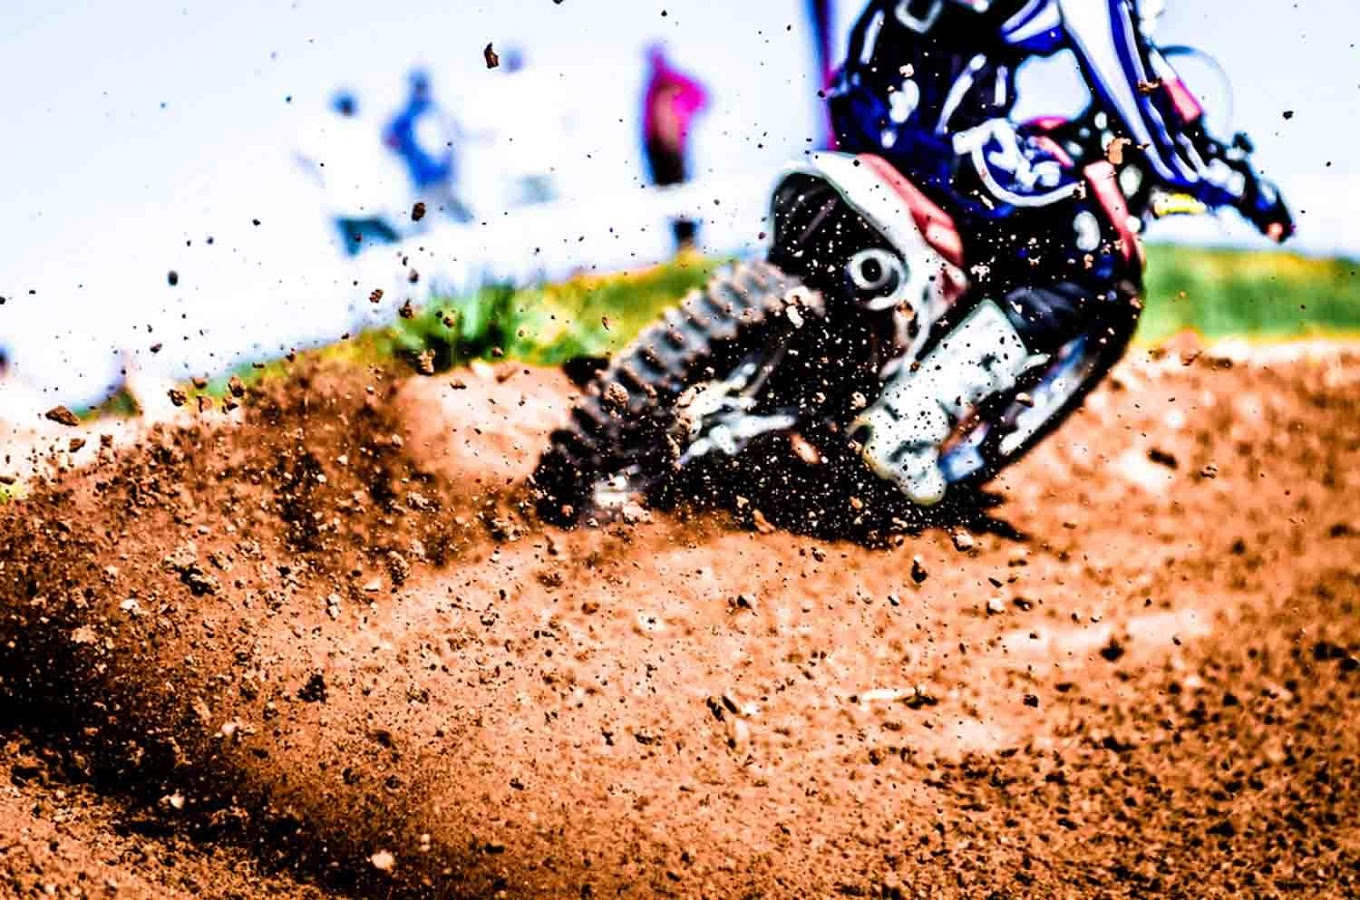 Motocross Wallpaper - Android Apps on Google Play